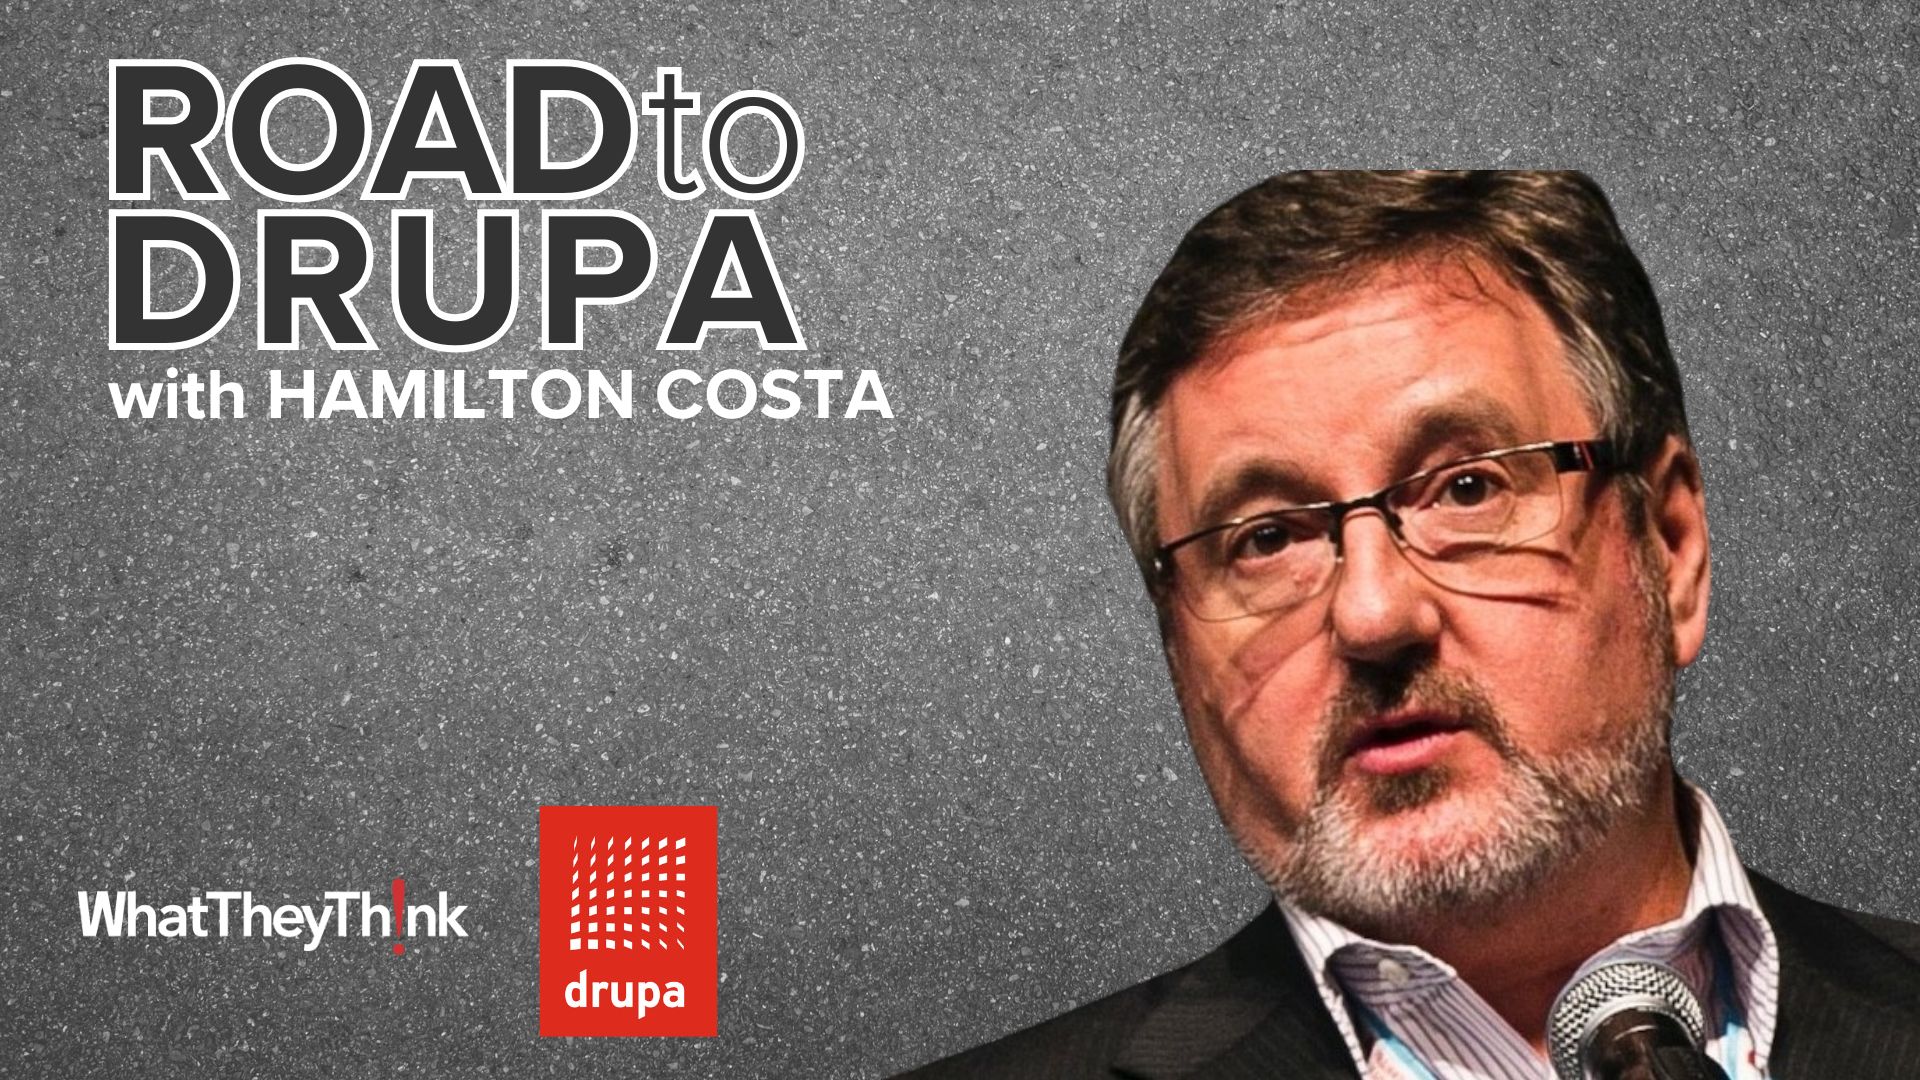 Video preview: Road to drupa: Hamilton Costa on the Heartbeat of Print